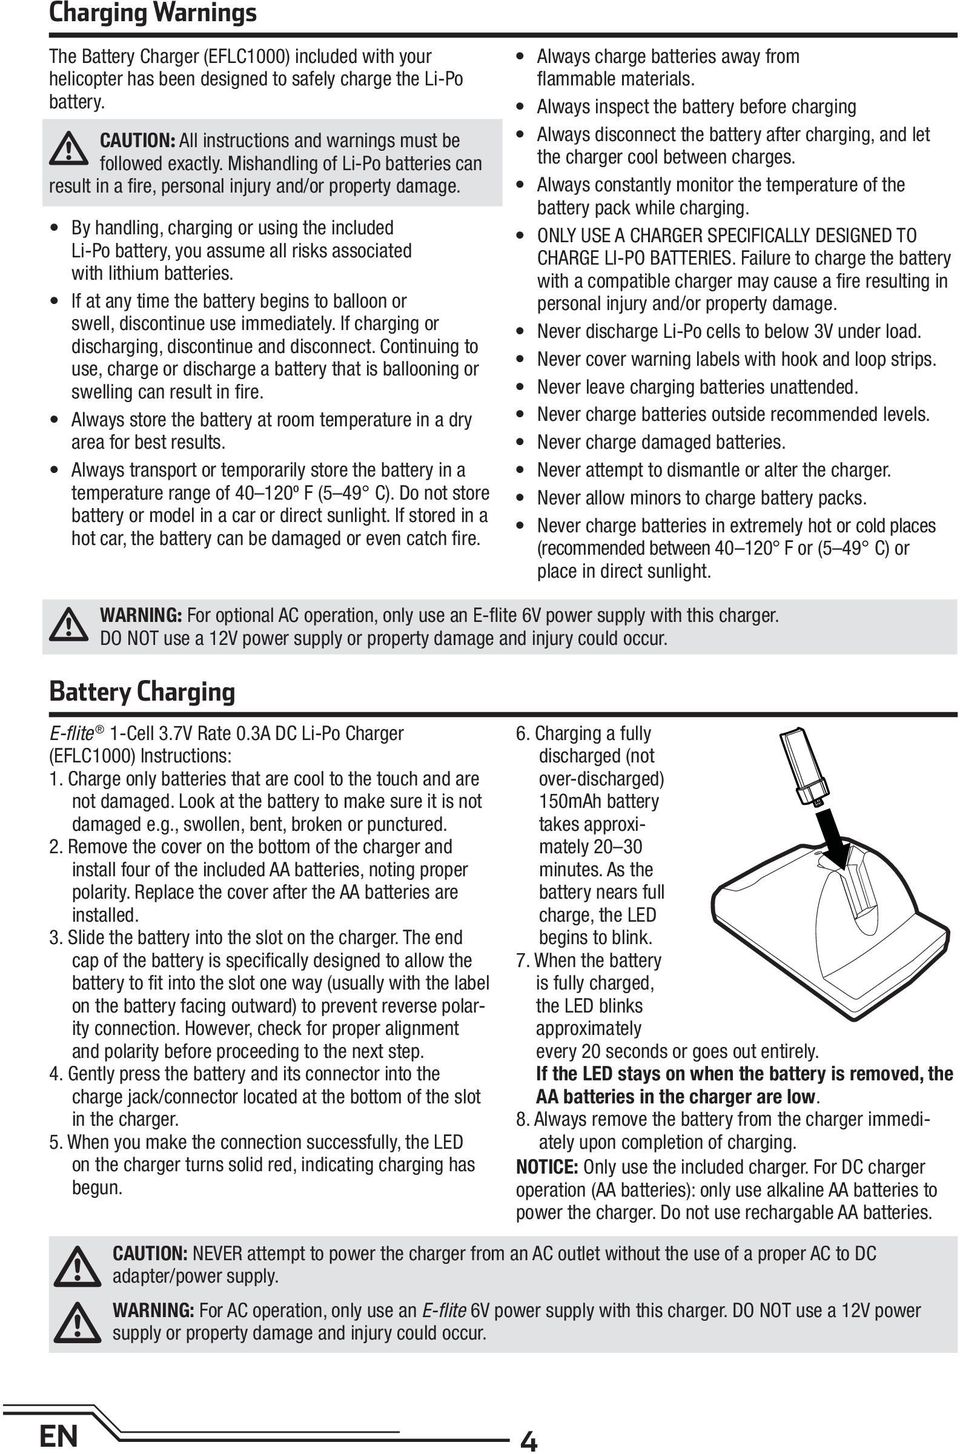 By handling, charging or using the included Li-Po battery, you assume all risks associated with lithium batteries. If at any time the battery begins to balloon or swell, discontinue use immediately.